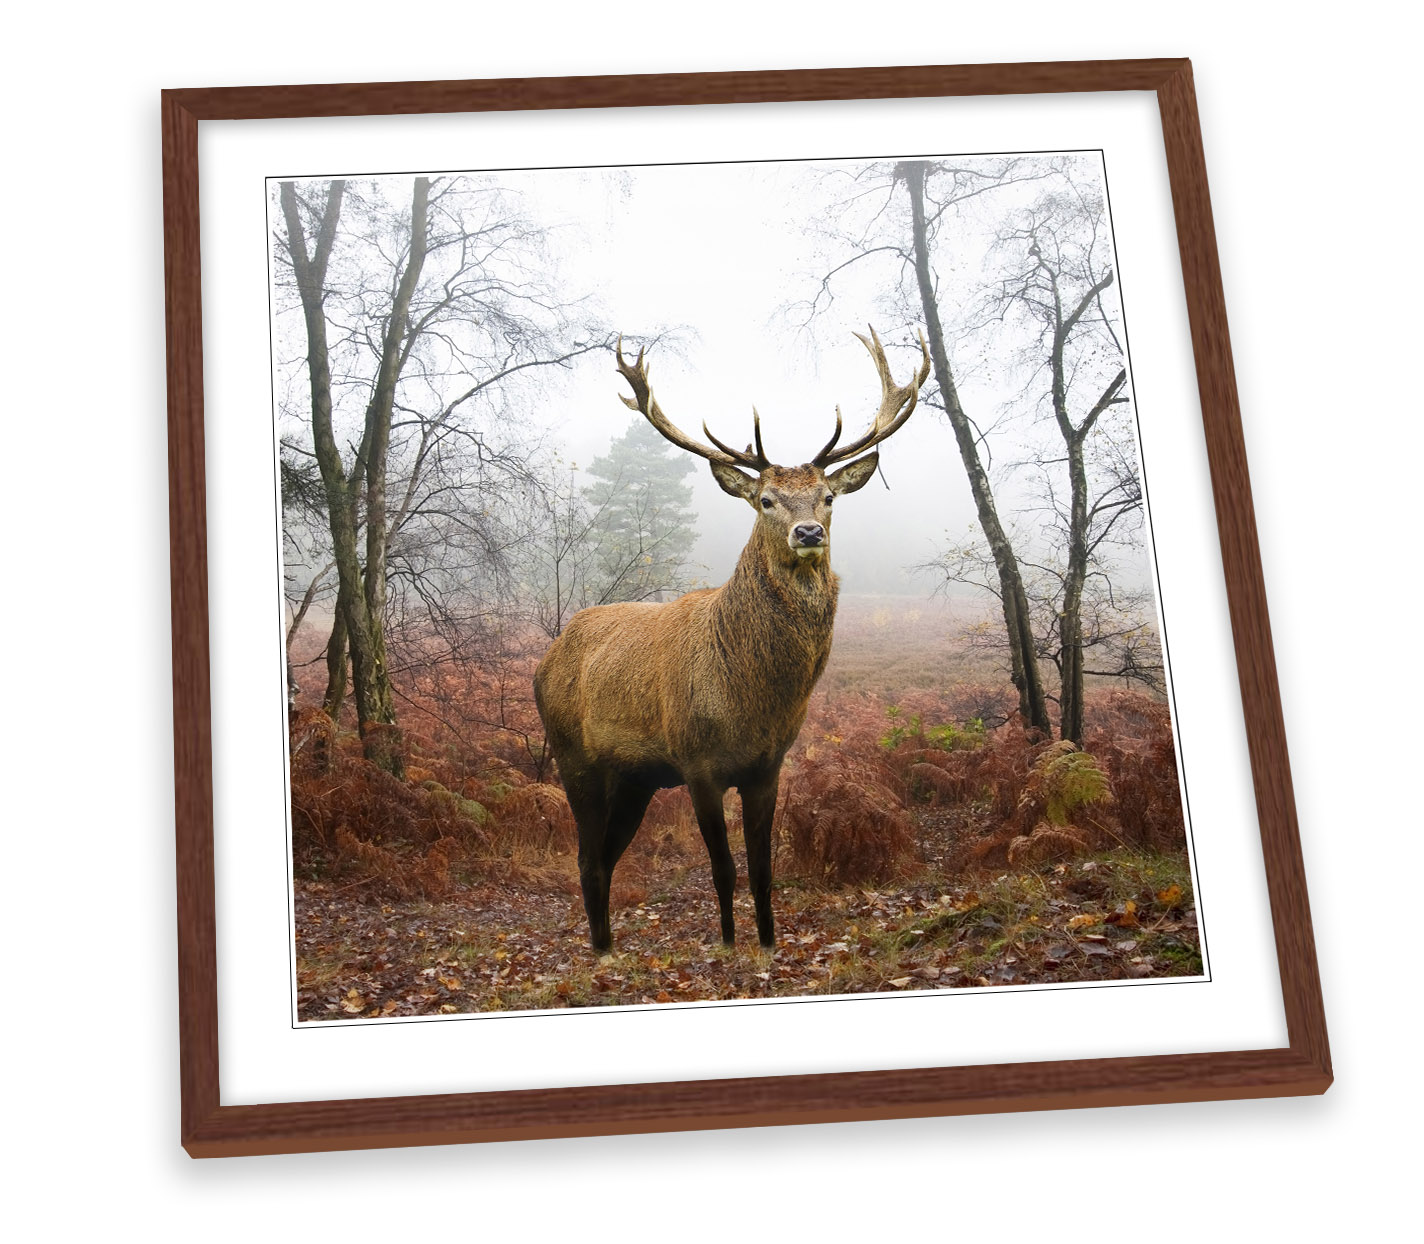 Deer Stag Highlands Picture CANVAS WALL ART Square Print